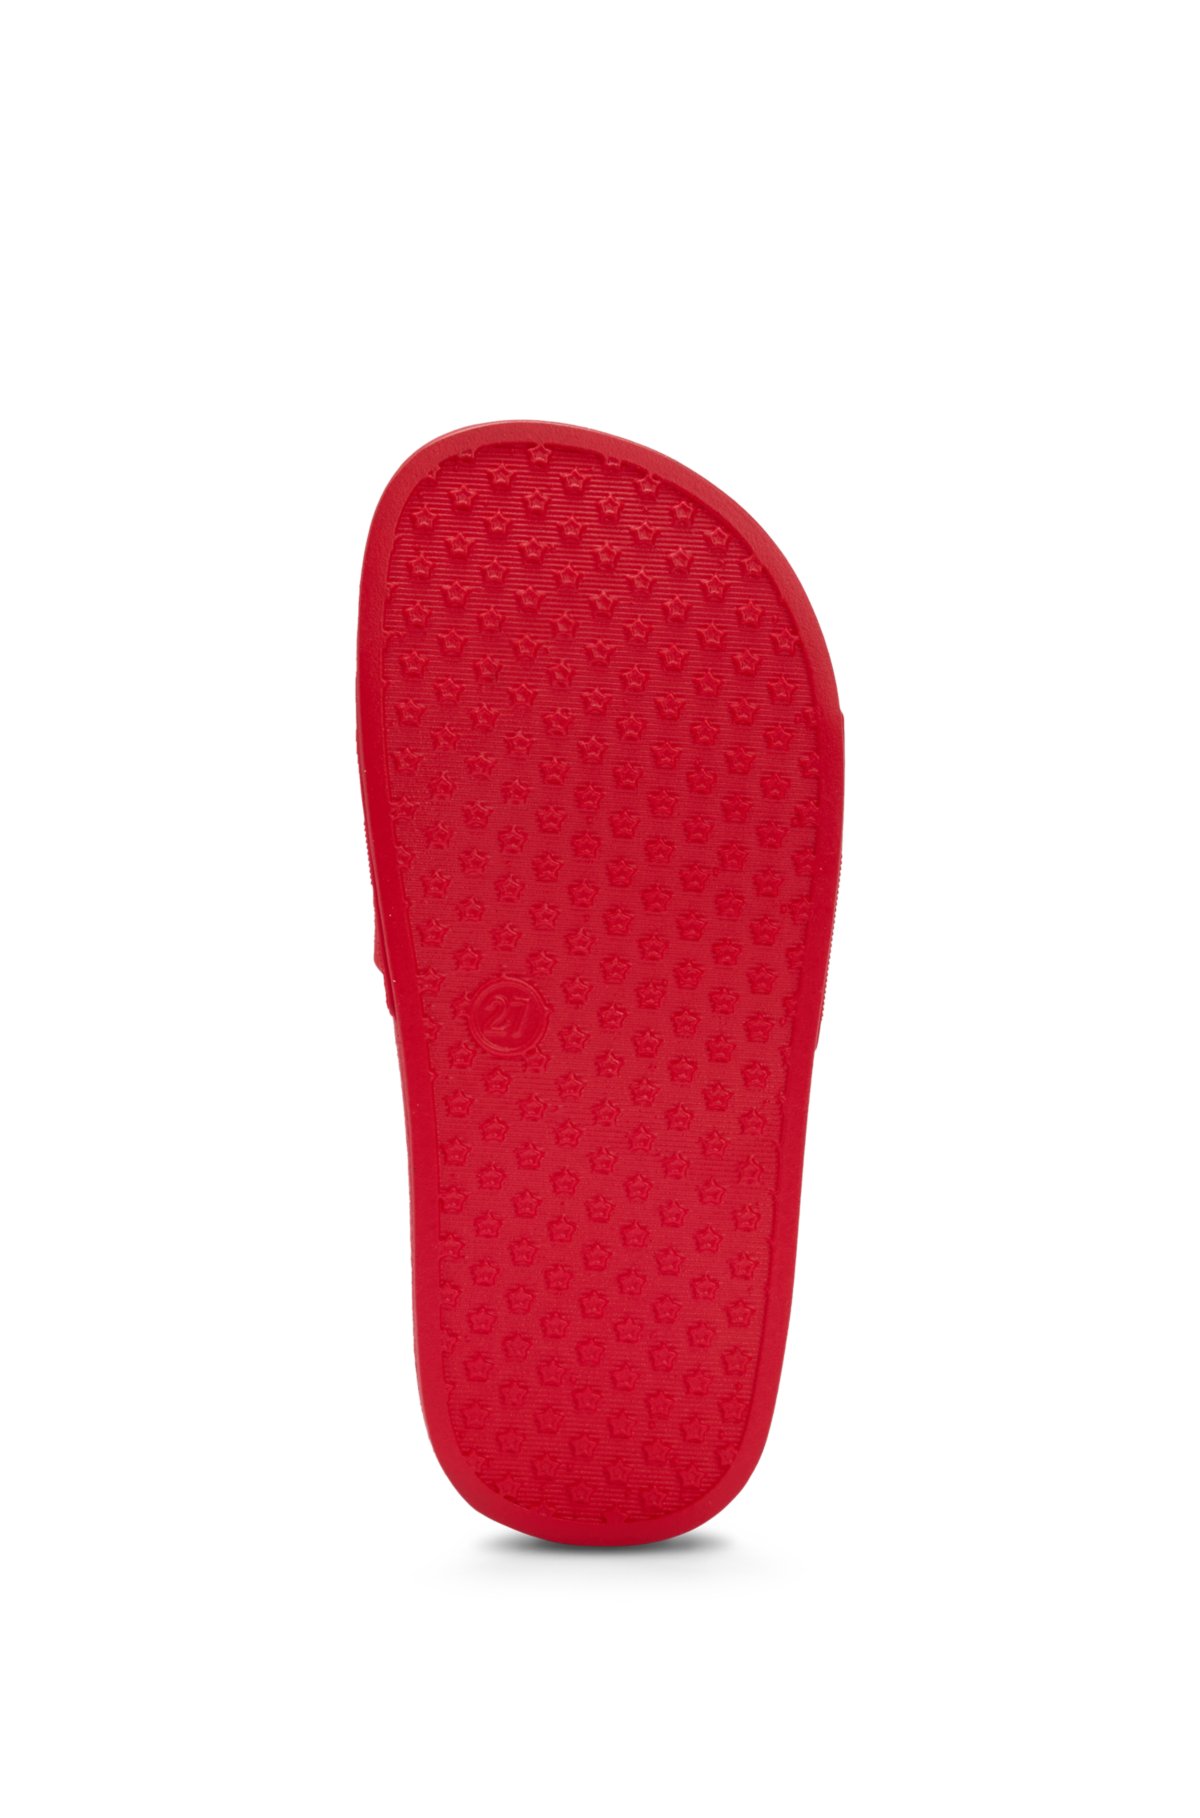 Kids' slides with contrast logos, Red